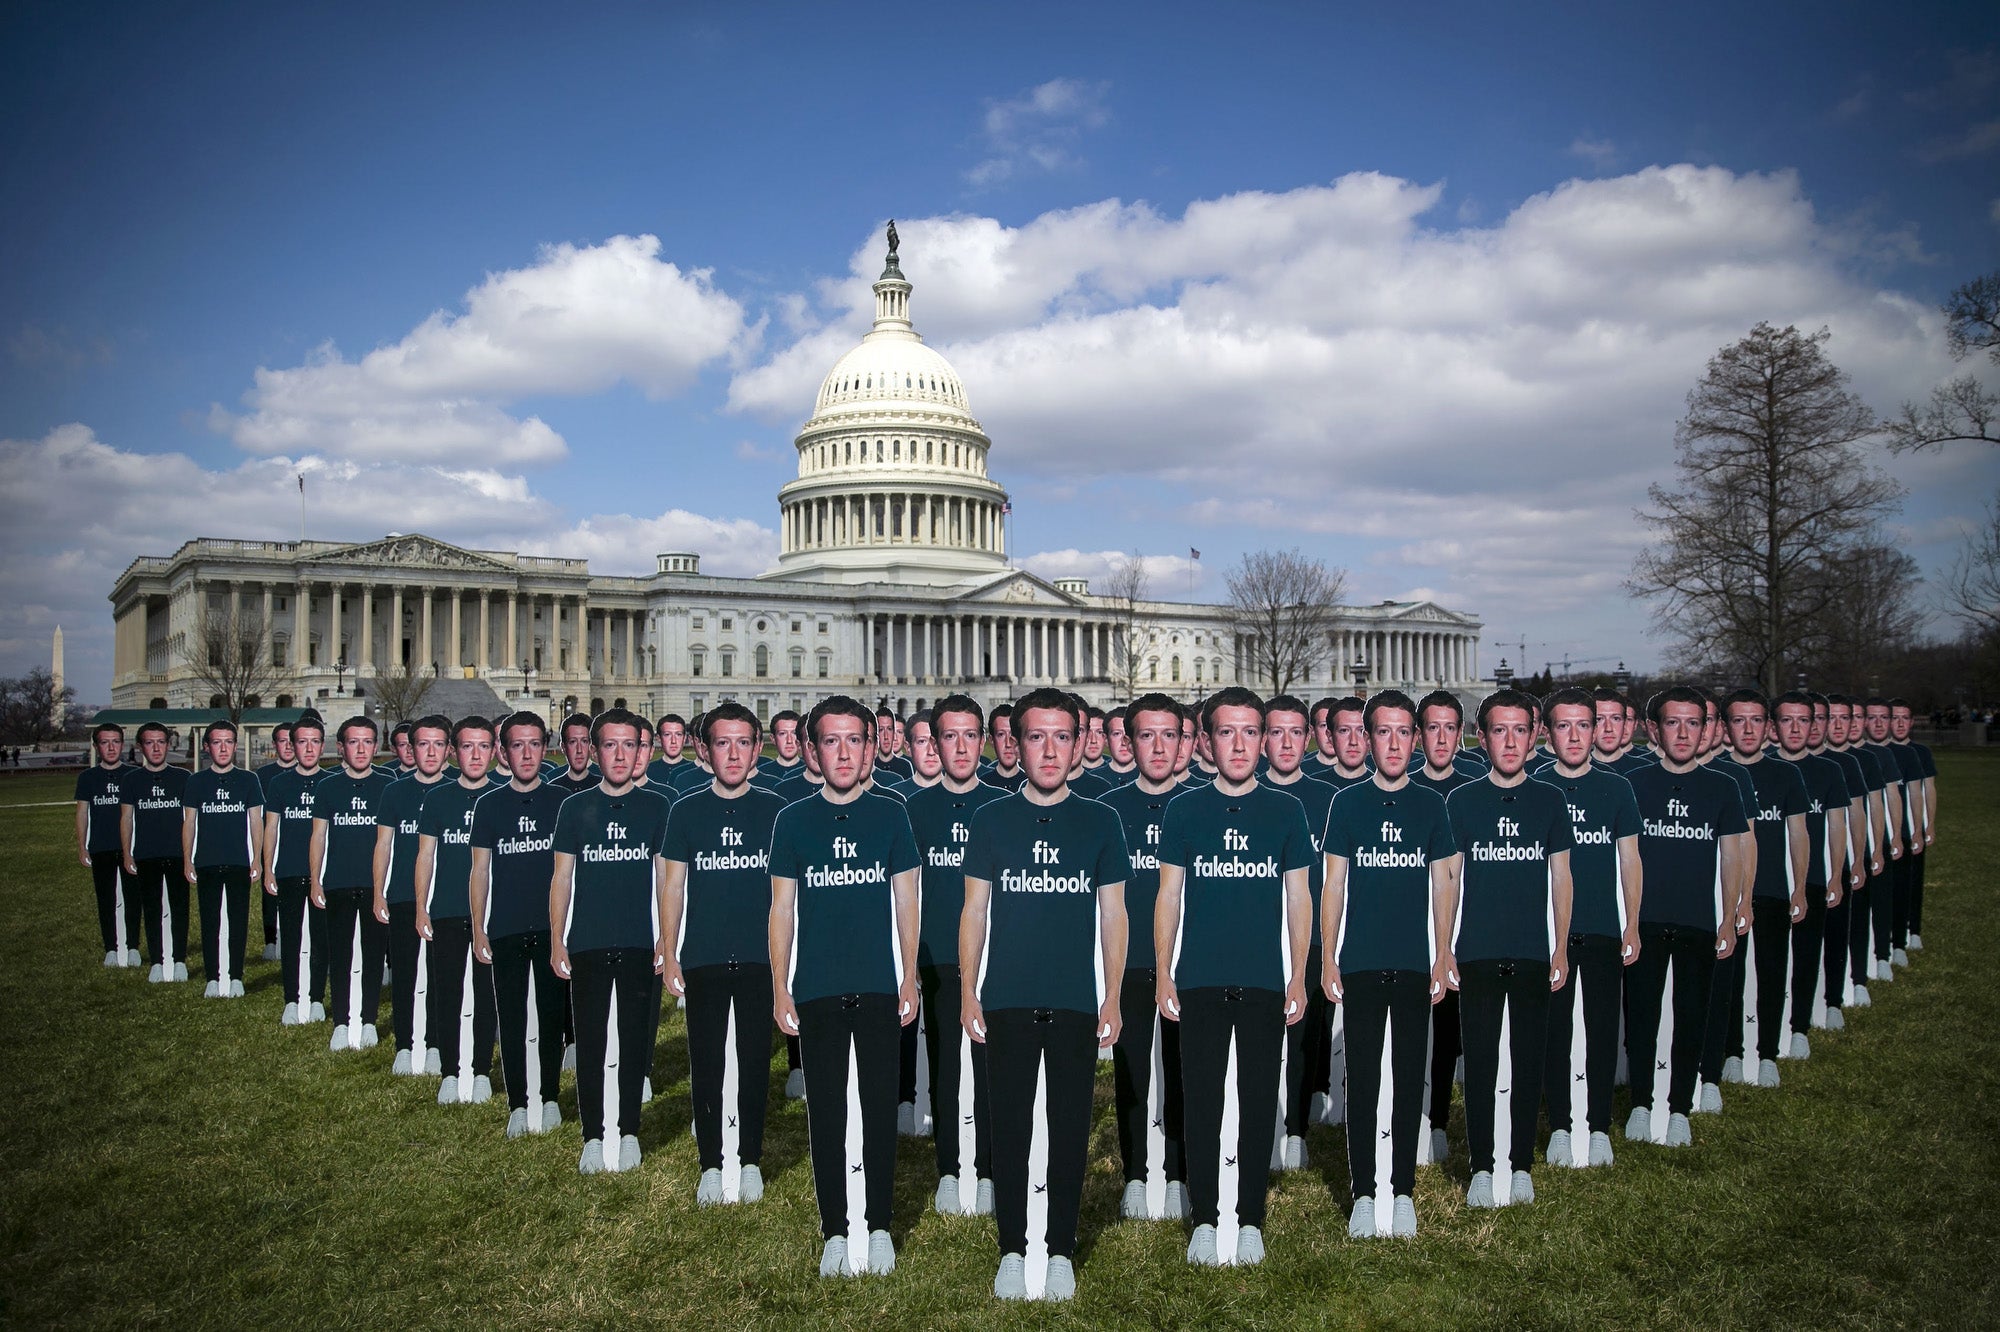 Cutouts of Facebook CEO Mark Zuckerberg are displayed on the South East lawn of the Capitol building